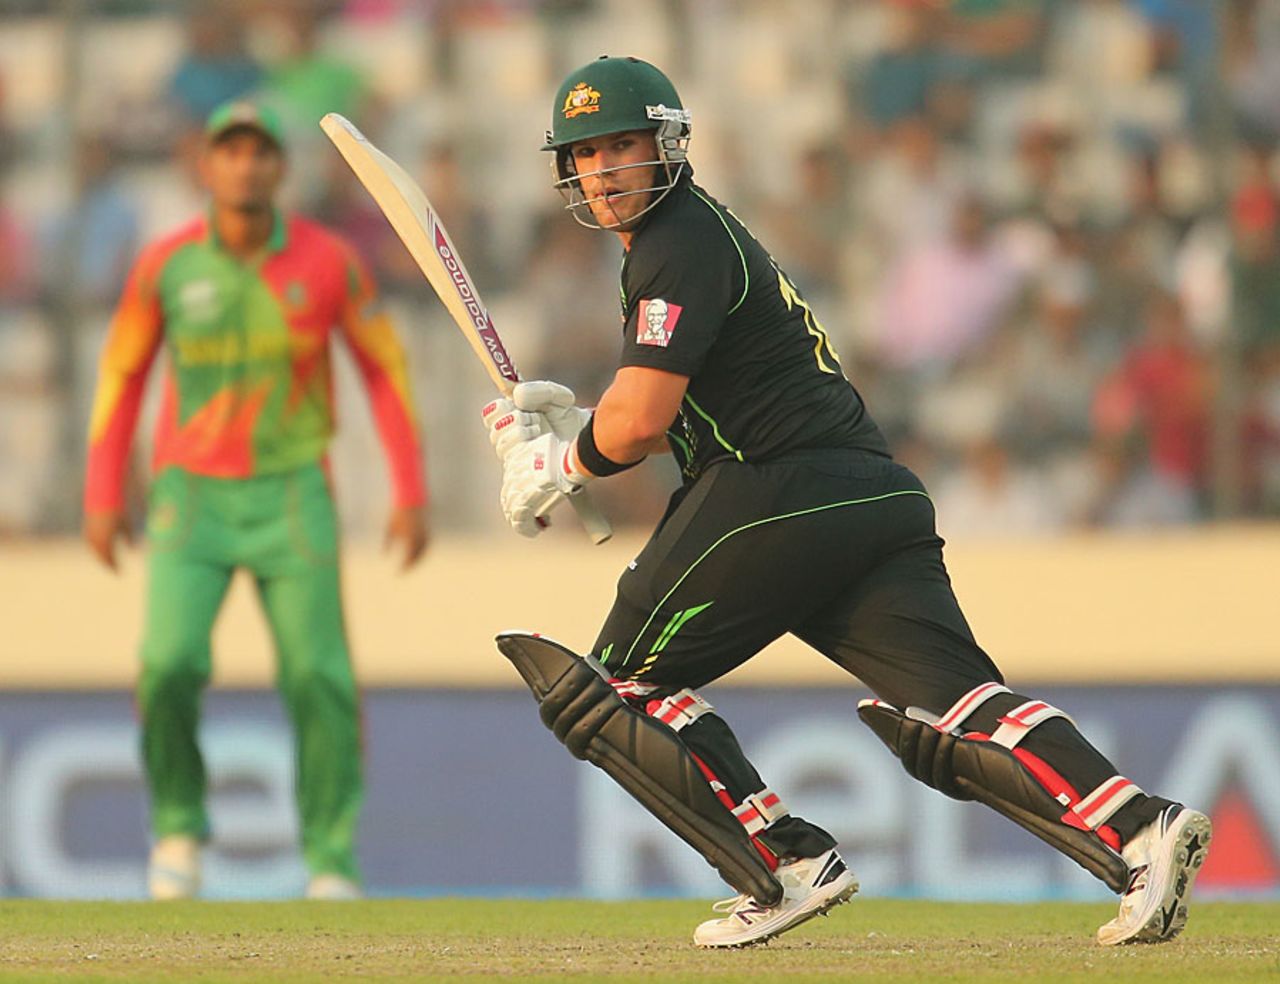 Aaron Finch clips one away to the leg side, Bangladesh v Australia, World T20, Group 2, Mirpur, April 1, 2014